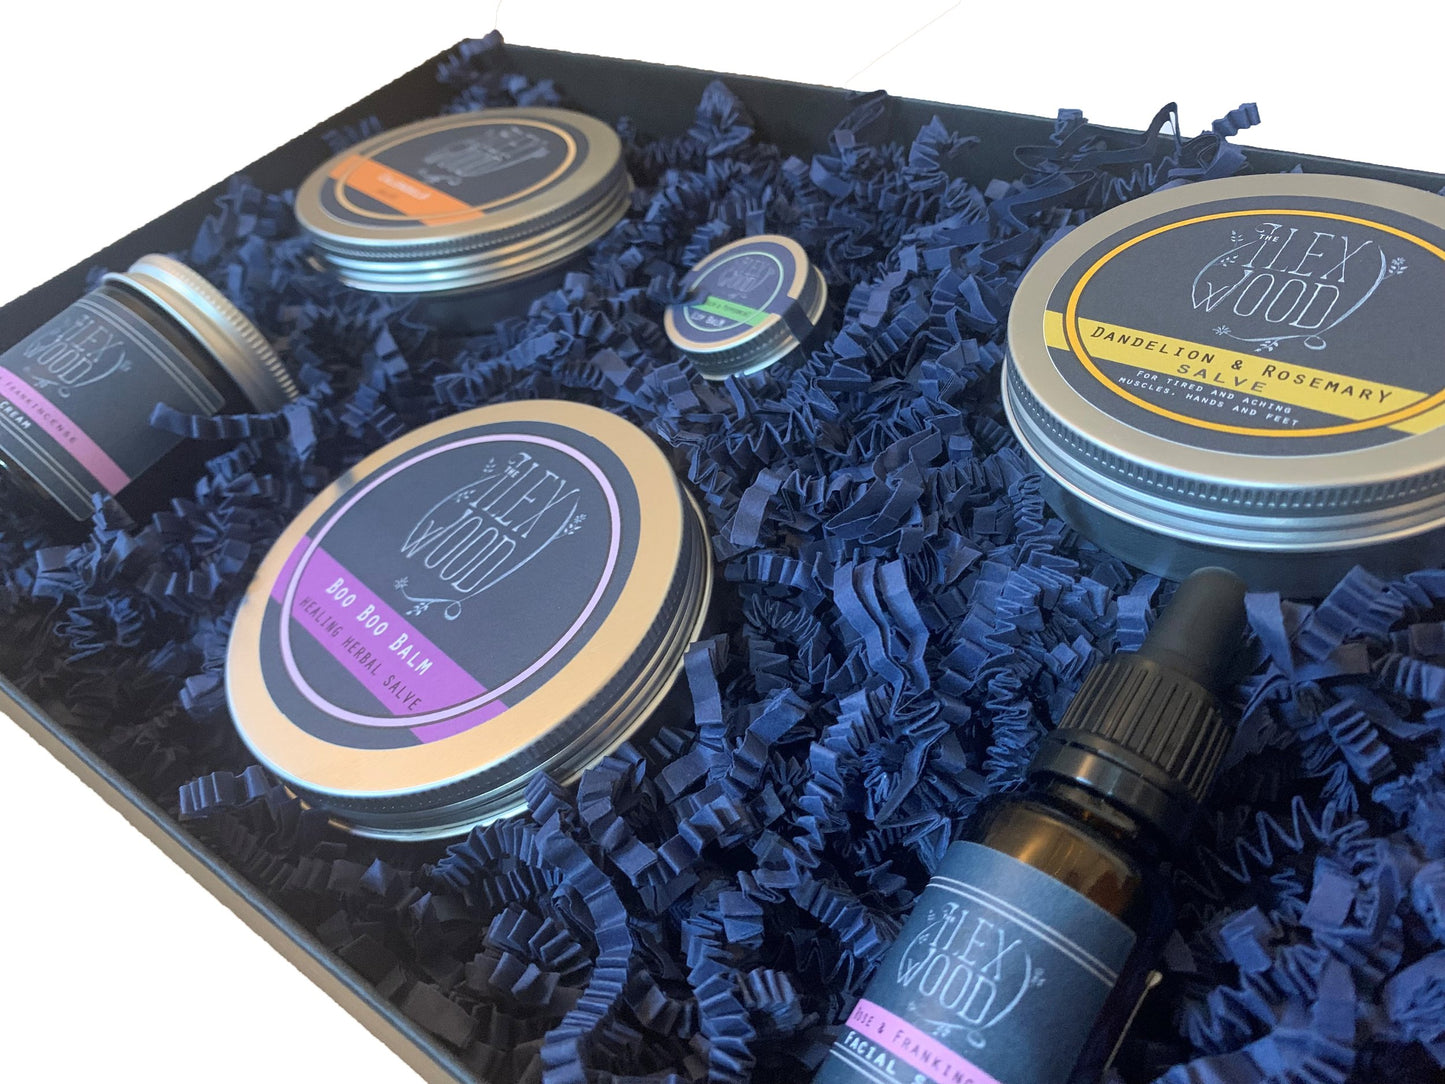 The Ultimate Natural Beauty Skin Care Gift Box